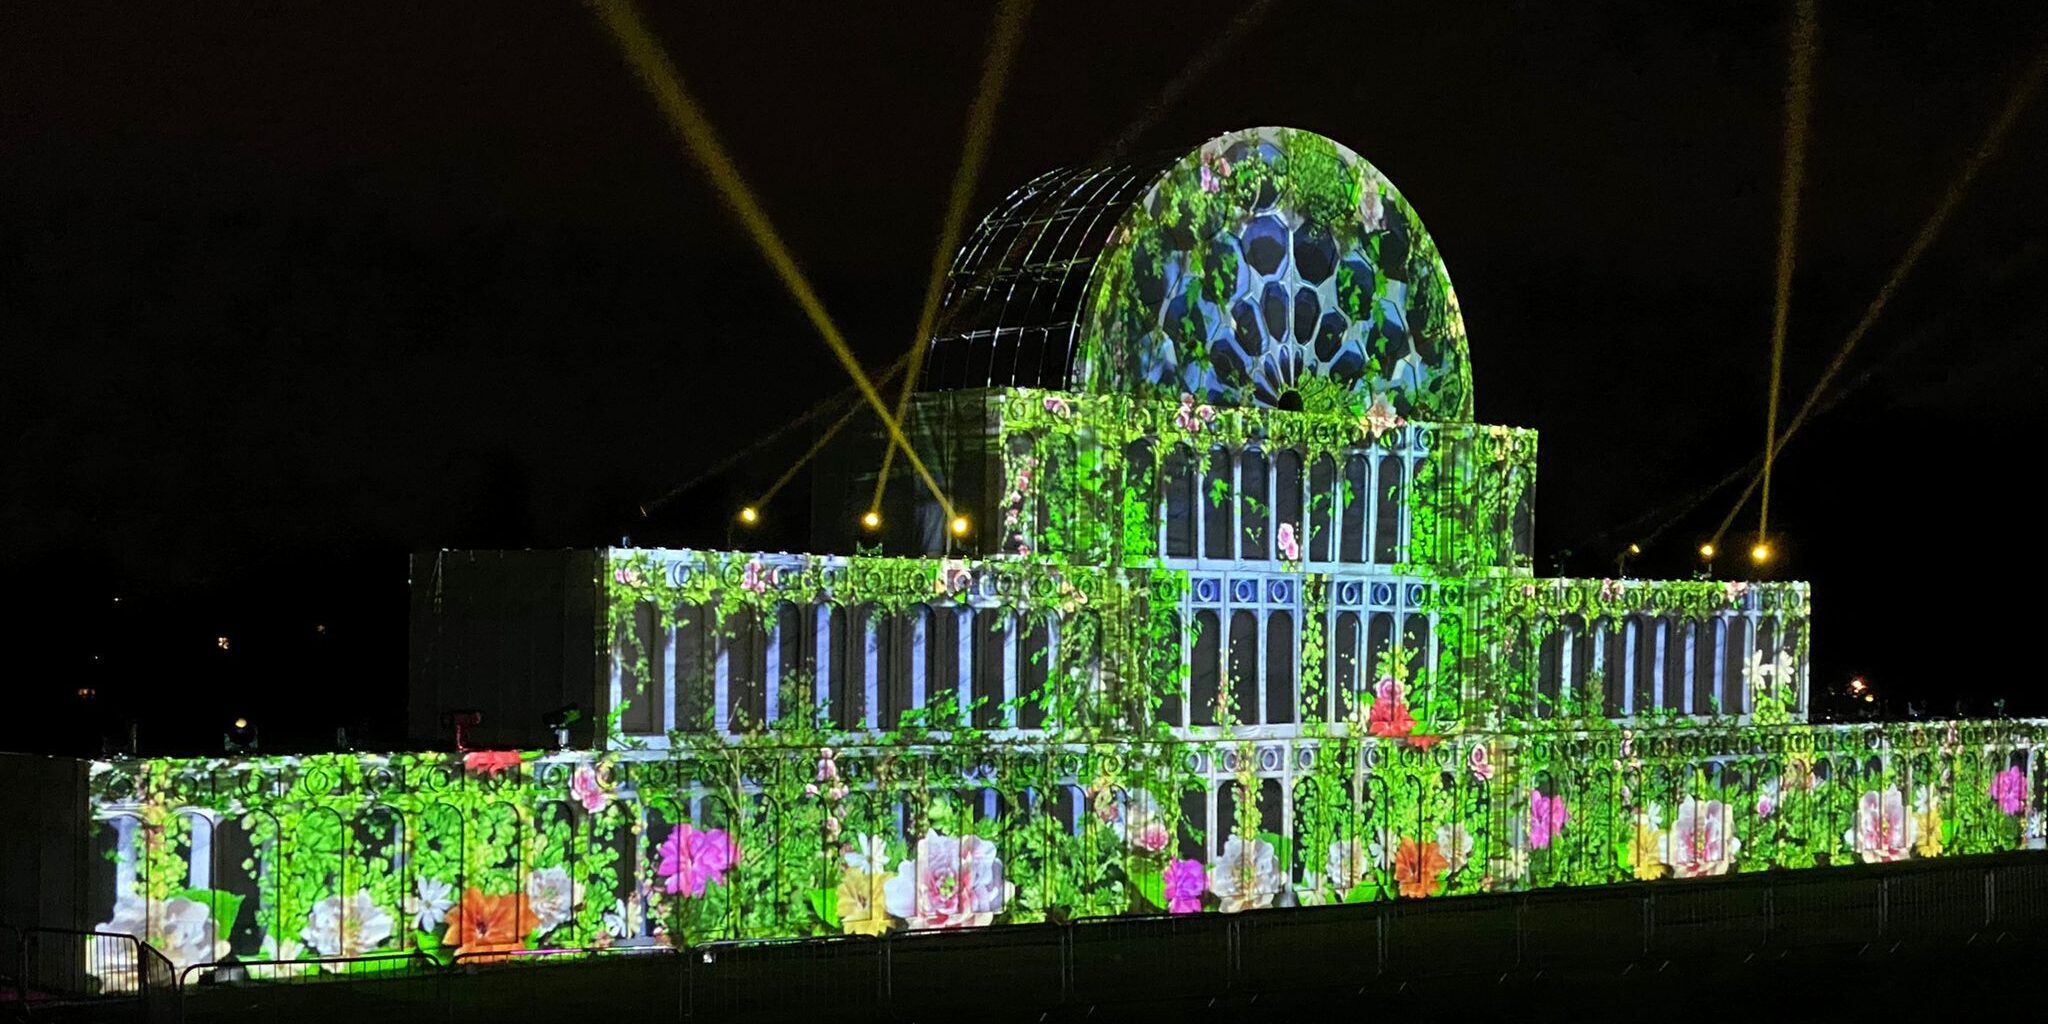 A lit-up representation of Crystal Palace at the Lightopia display